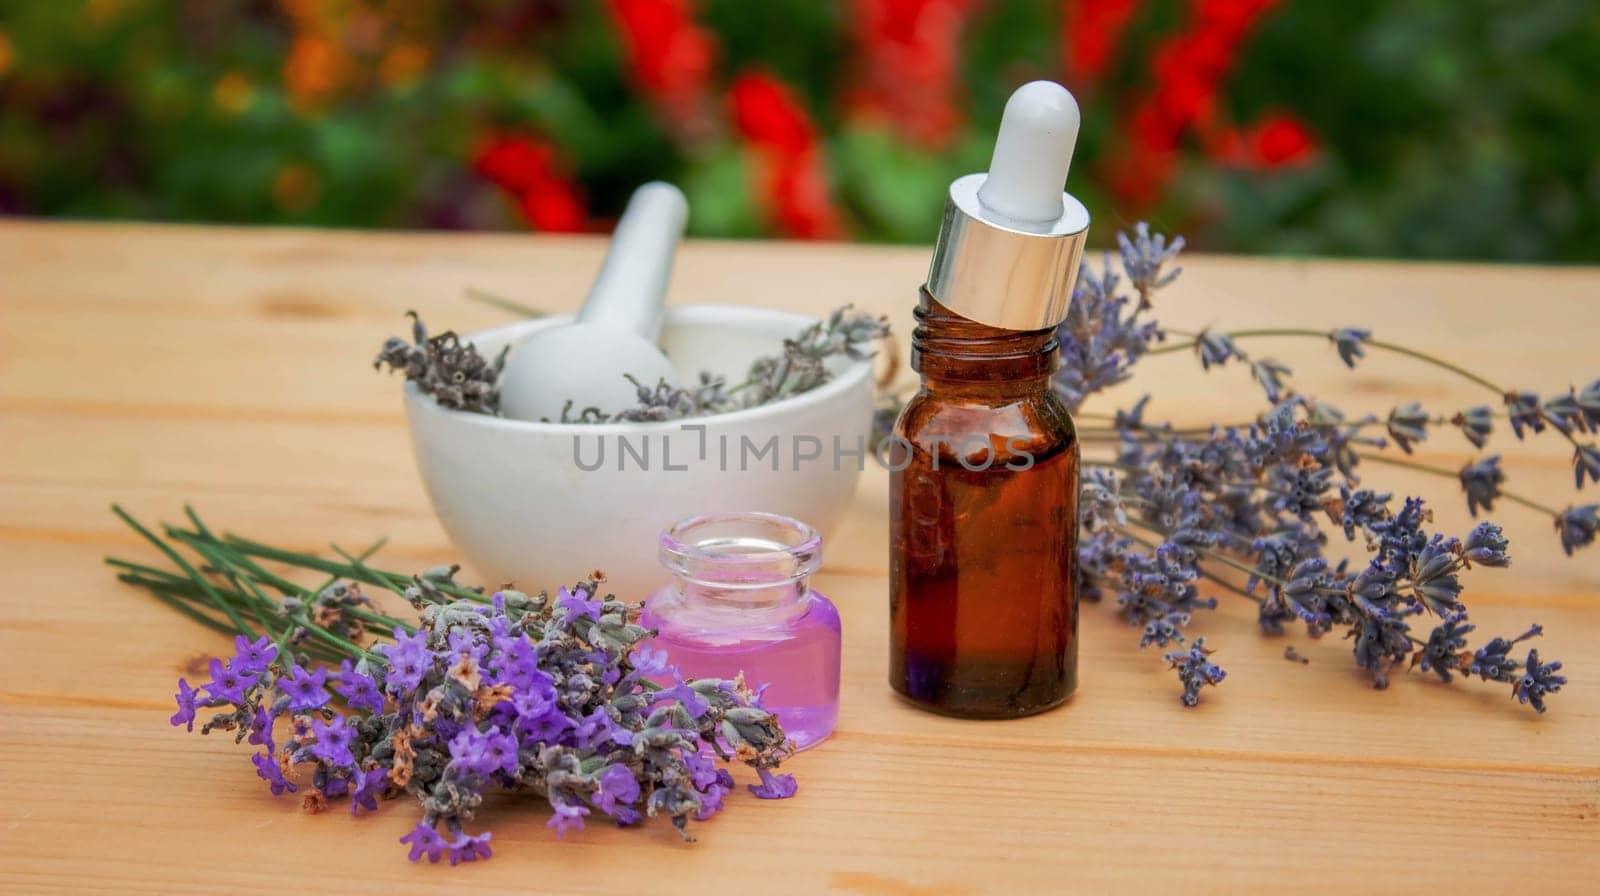 Glass bottle of lavender essential oil on a wooden background